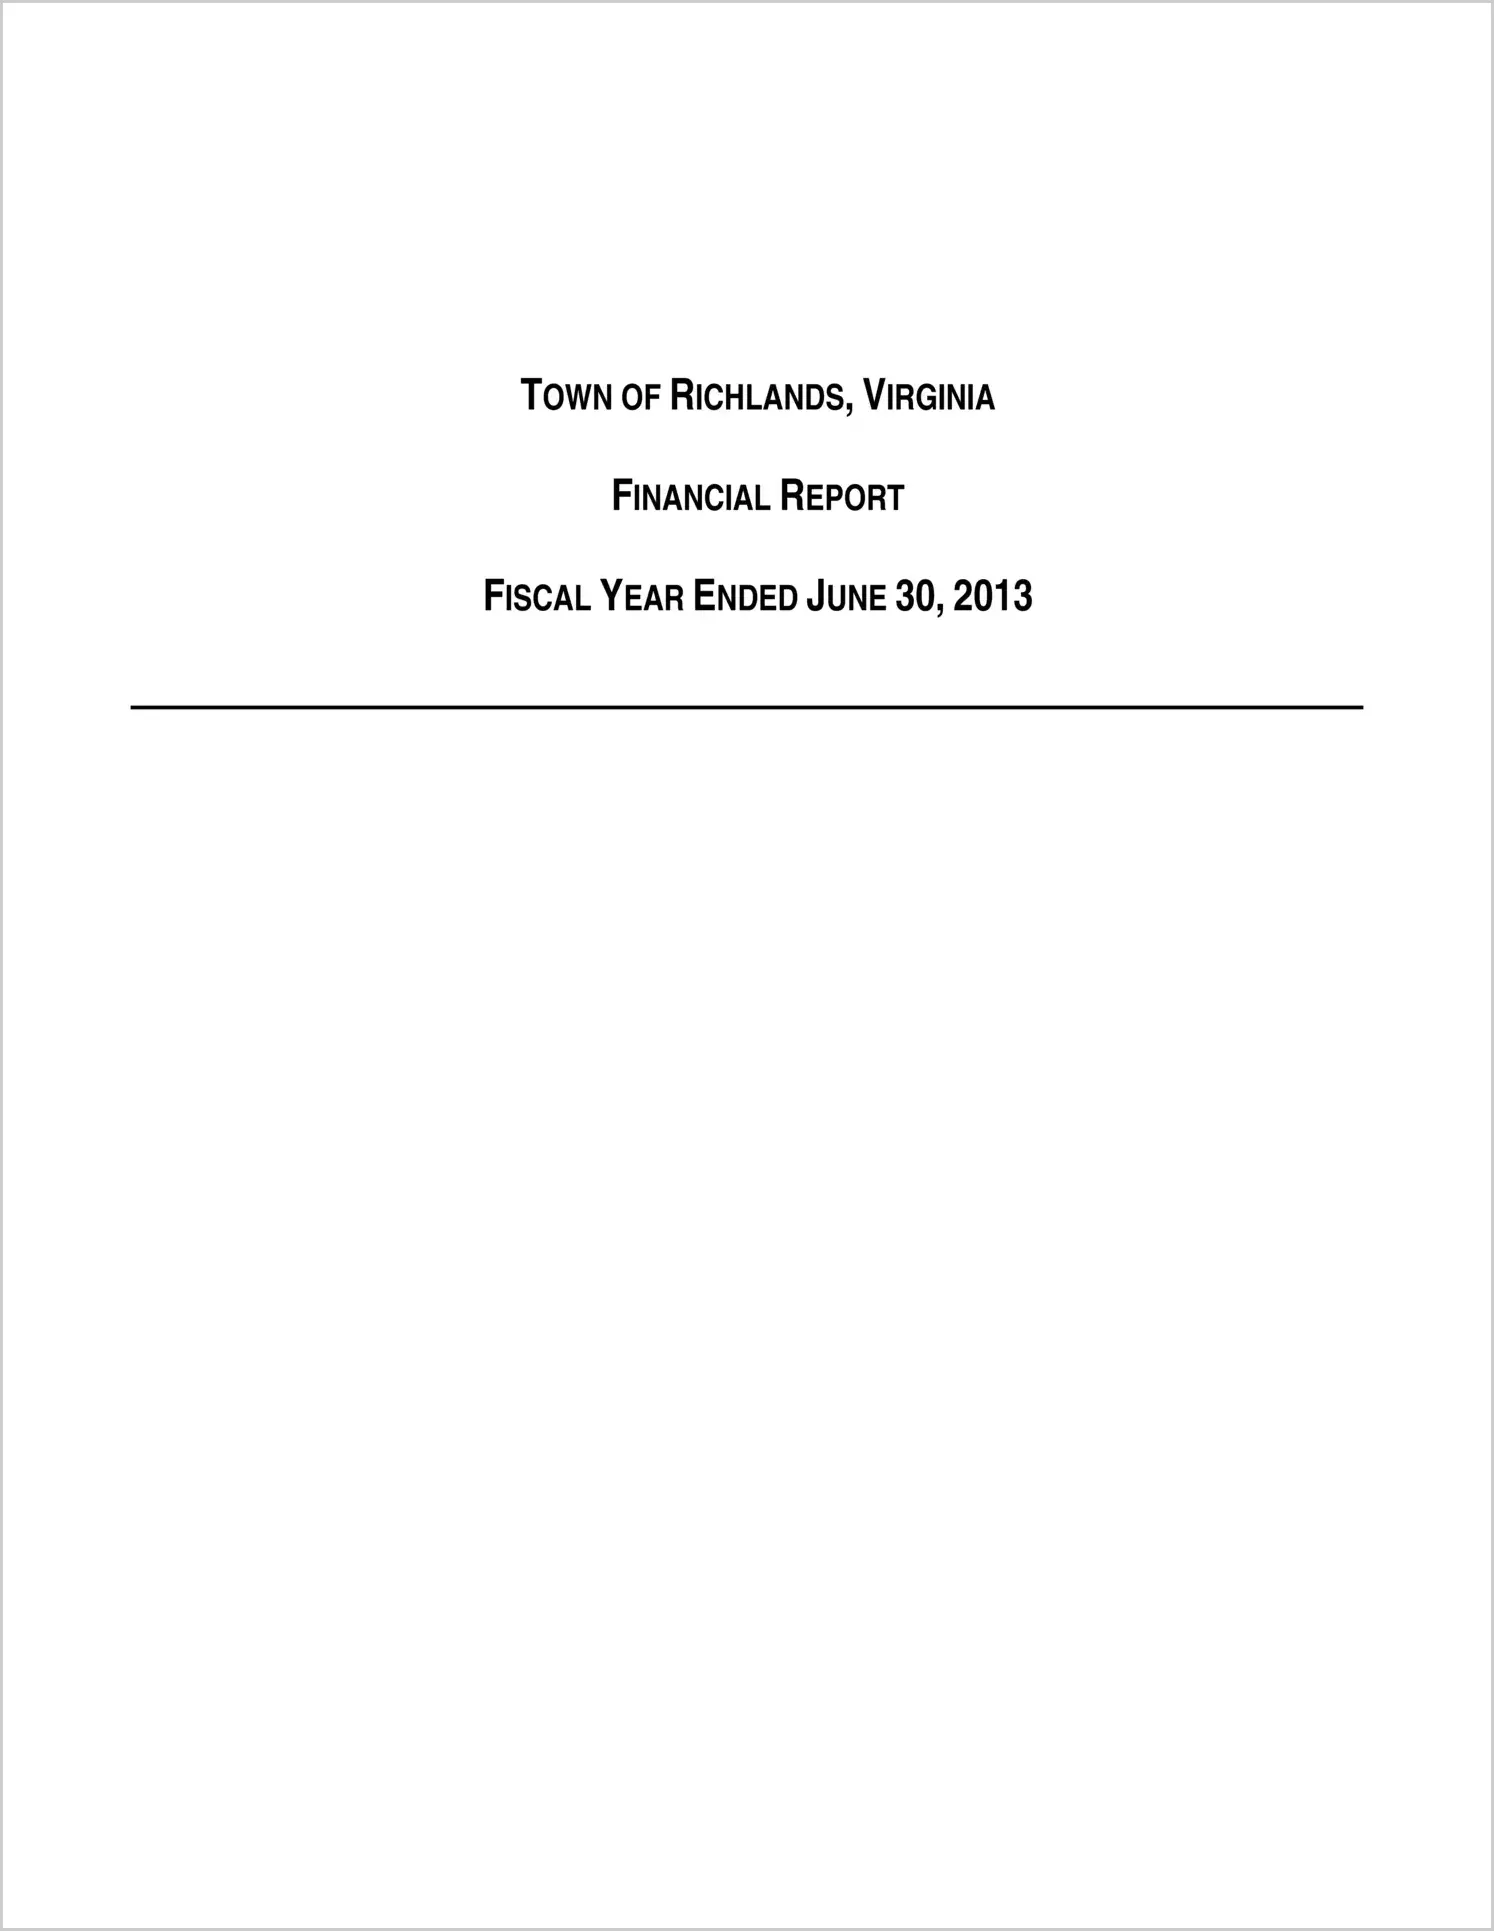 2013 Annual Financial Report for Town of Richlands